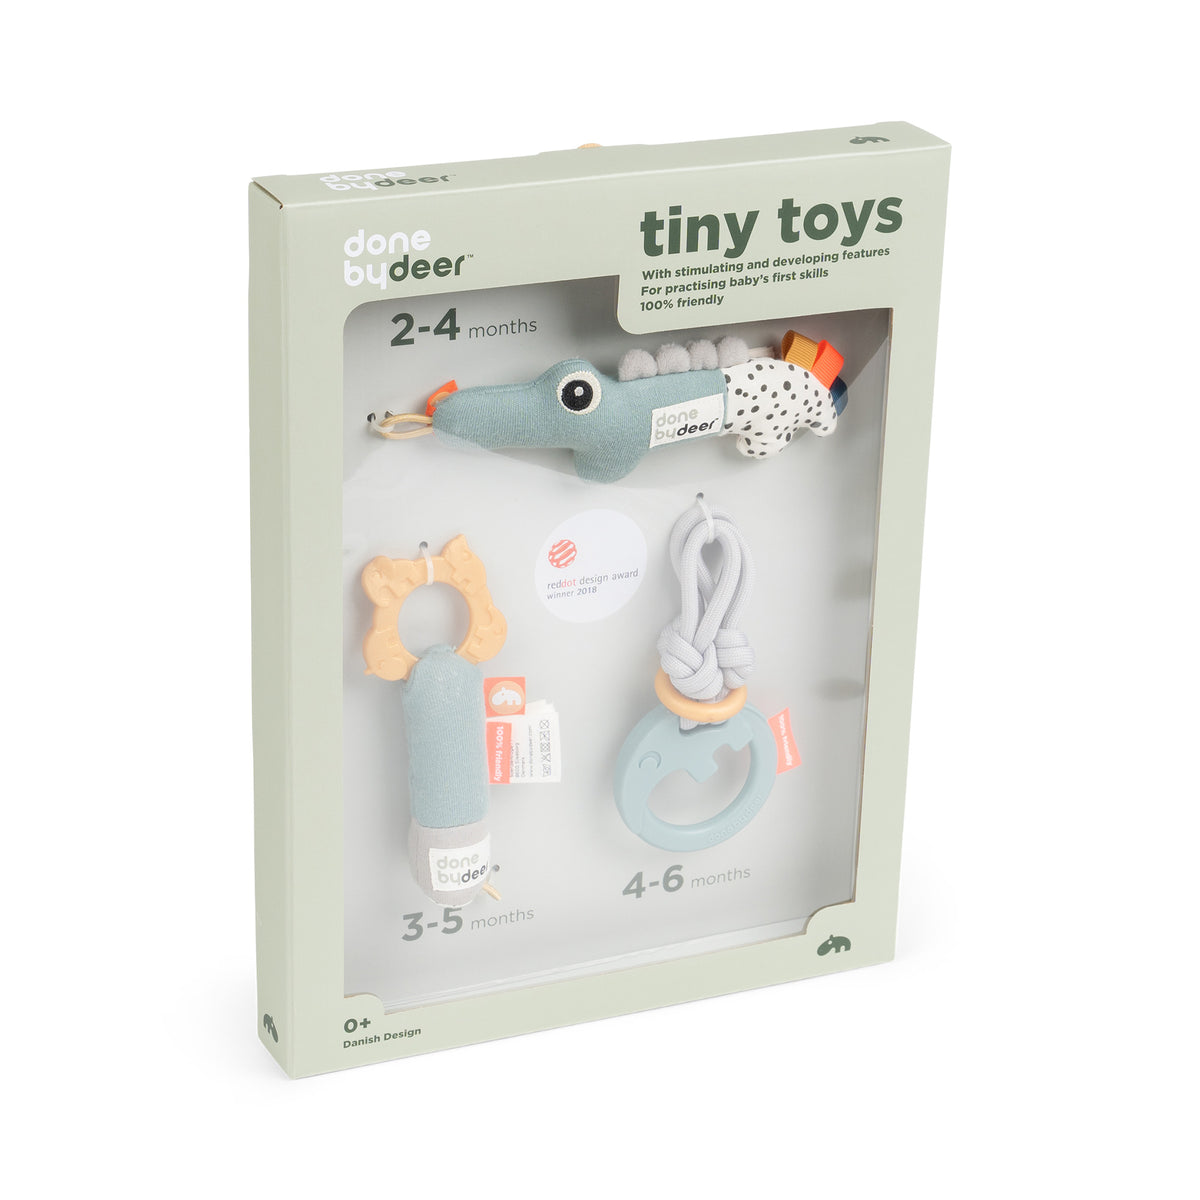 Tiny toys gift set - Deer friends - Colour mix - Front